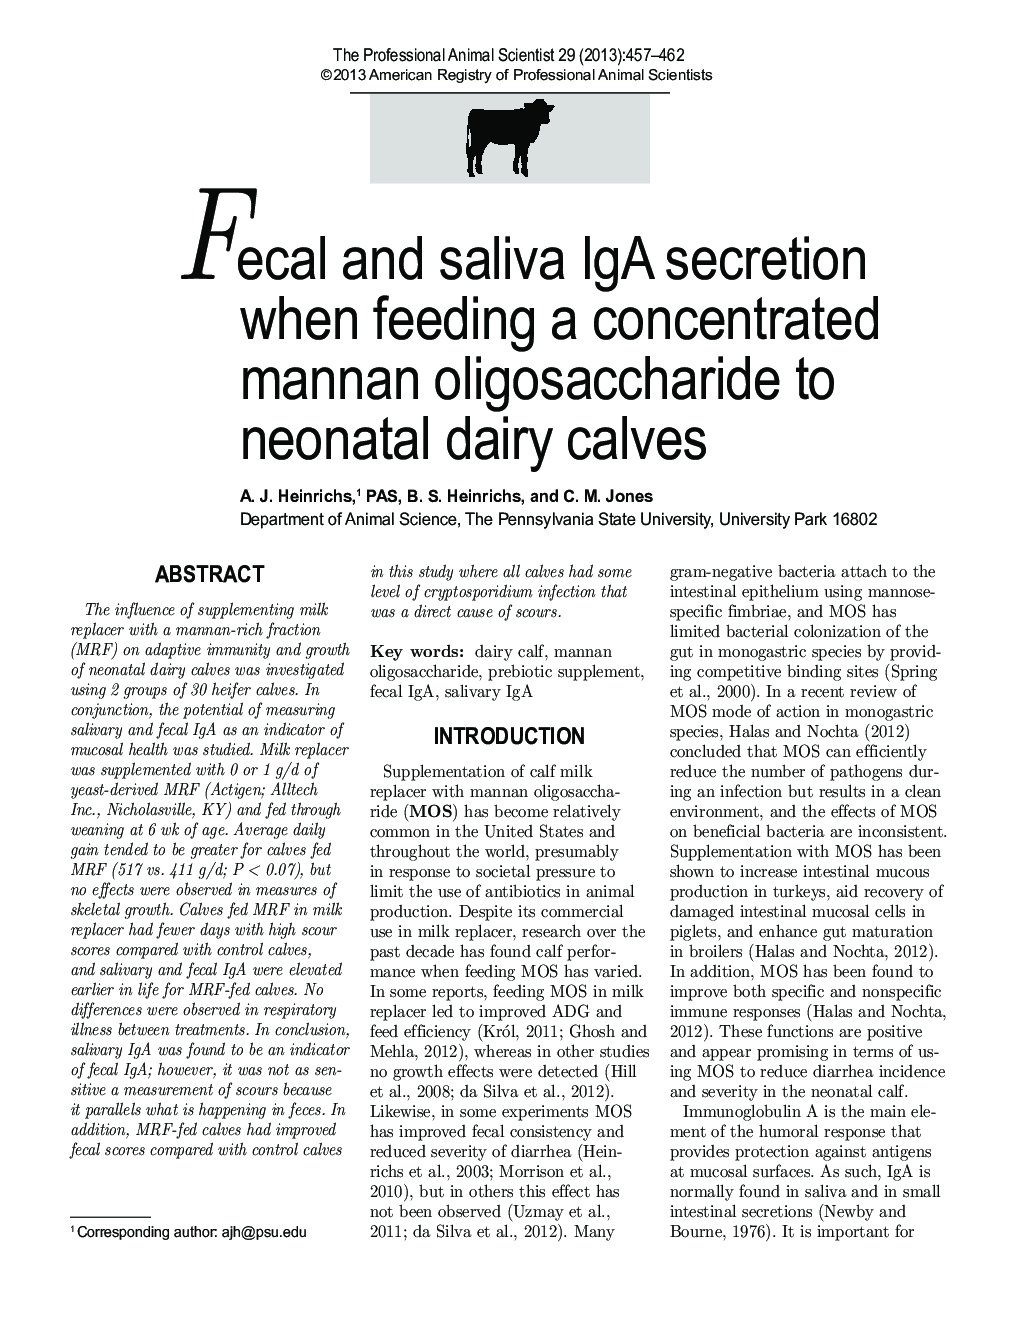 Fecal and saliva IgA secretion when feeding a concentrated mannan oligosaccharide to neonatal dairy calves